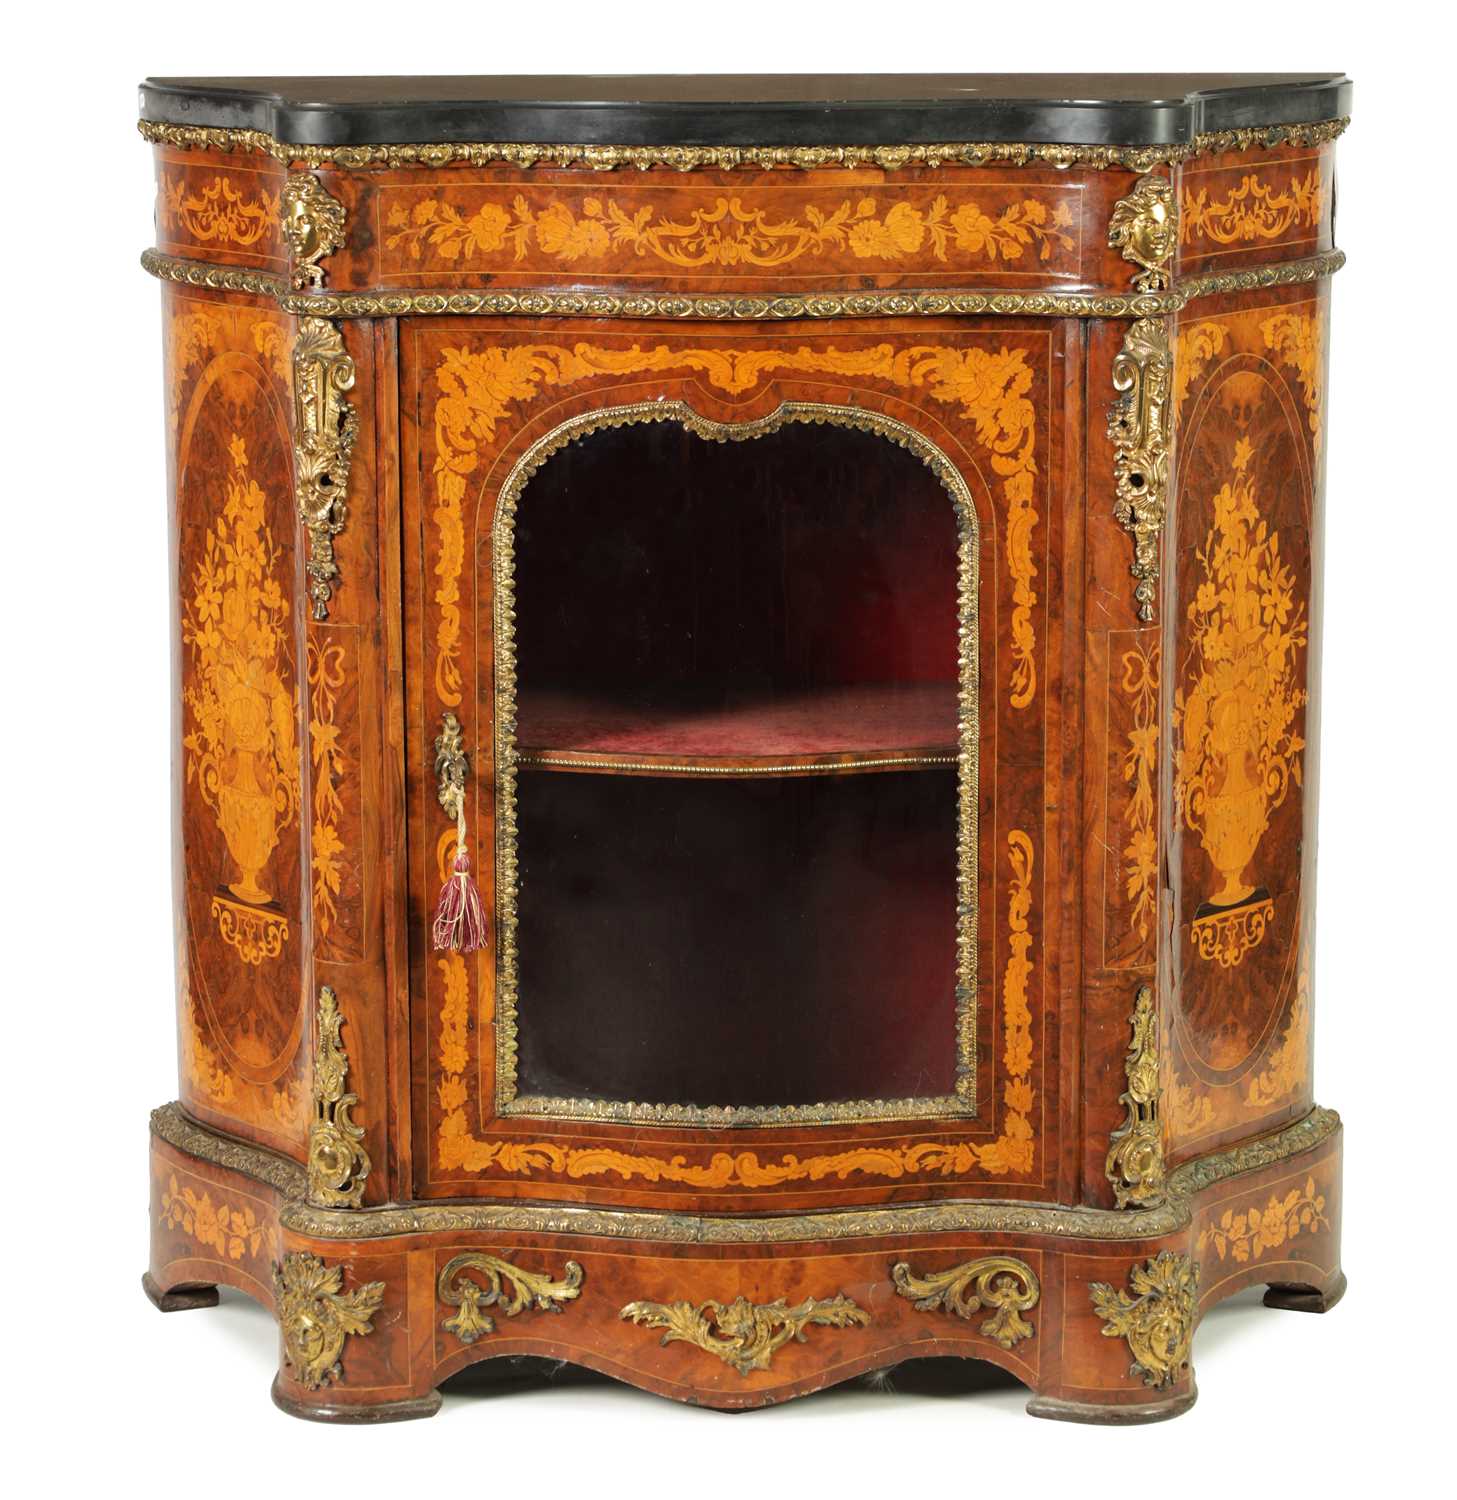 A FINE 19TH CENTURY ORMOLU MOUNTED WALNUT AND FLORAL MARQUETRY INLAID SERPENTINE SIDE CABINET